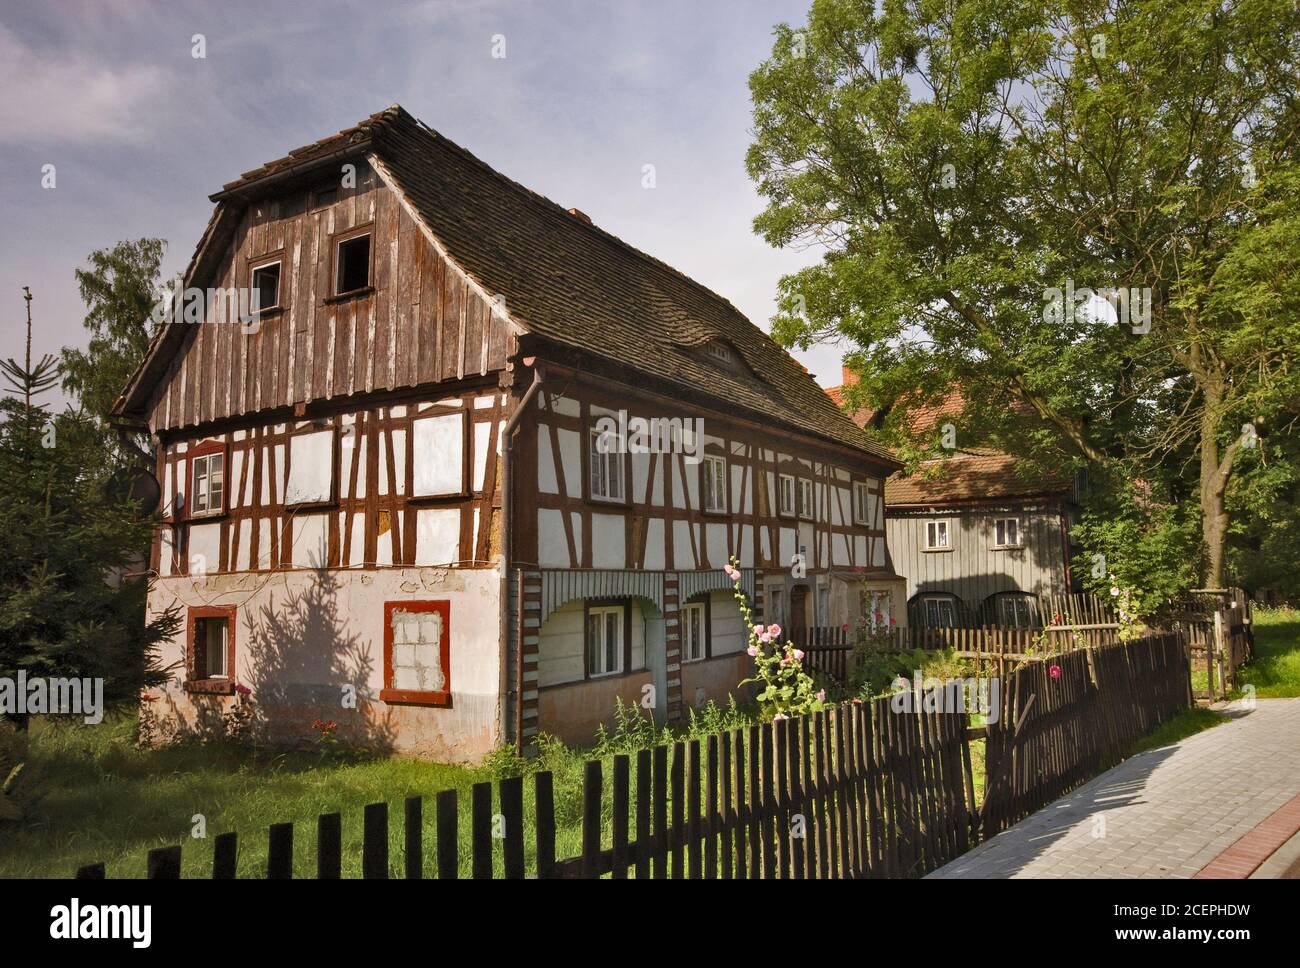 Half timbered Lusatian weavers houses in Bogatynia, Lower Silesia region, Poland Stock Photo